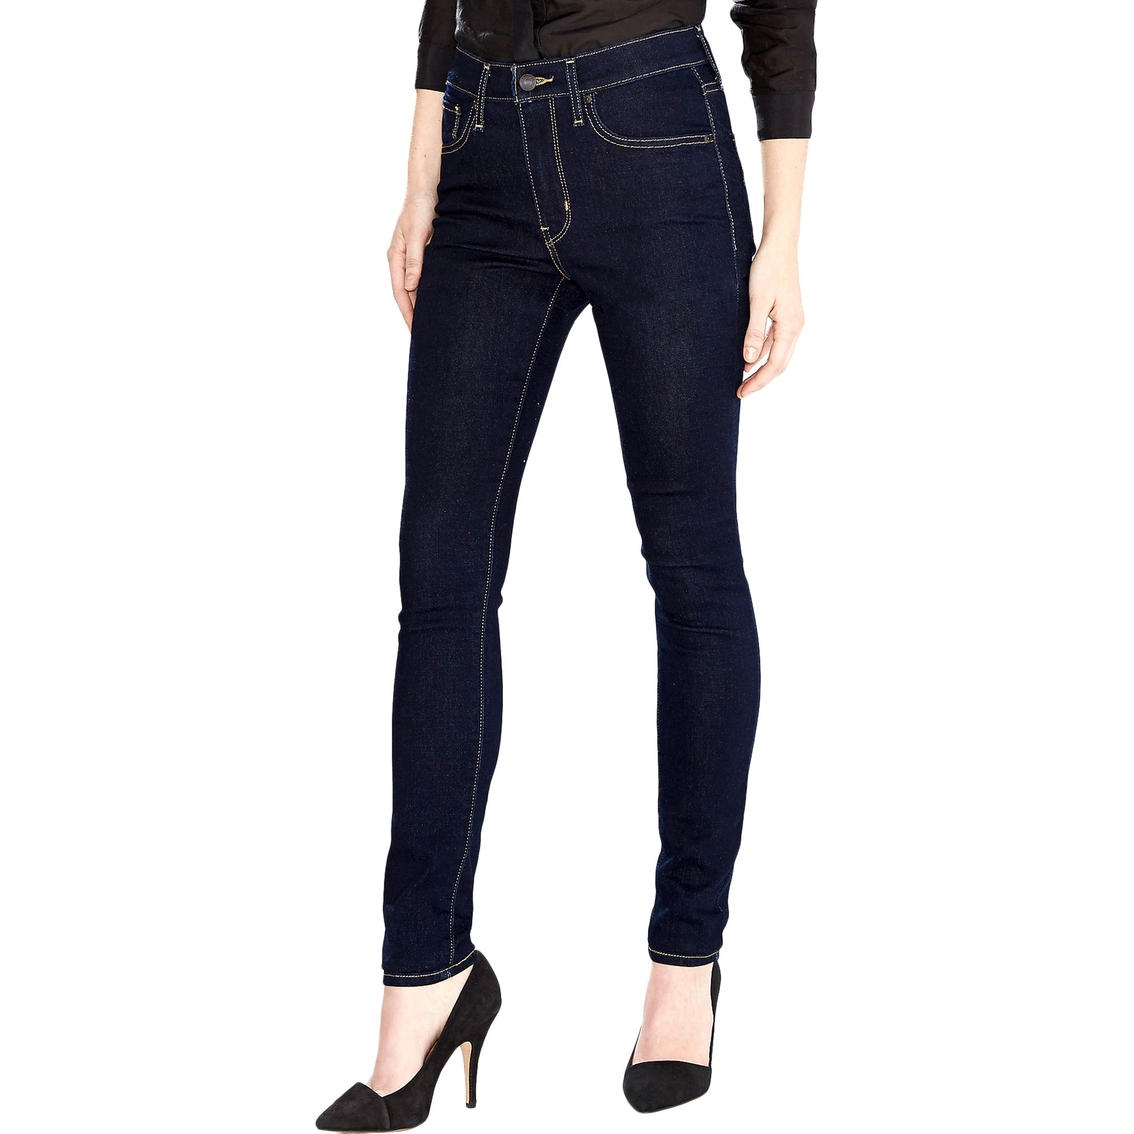 High rise skinny jeans levis